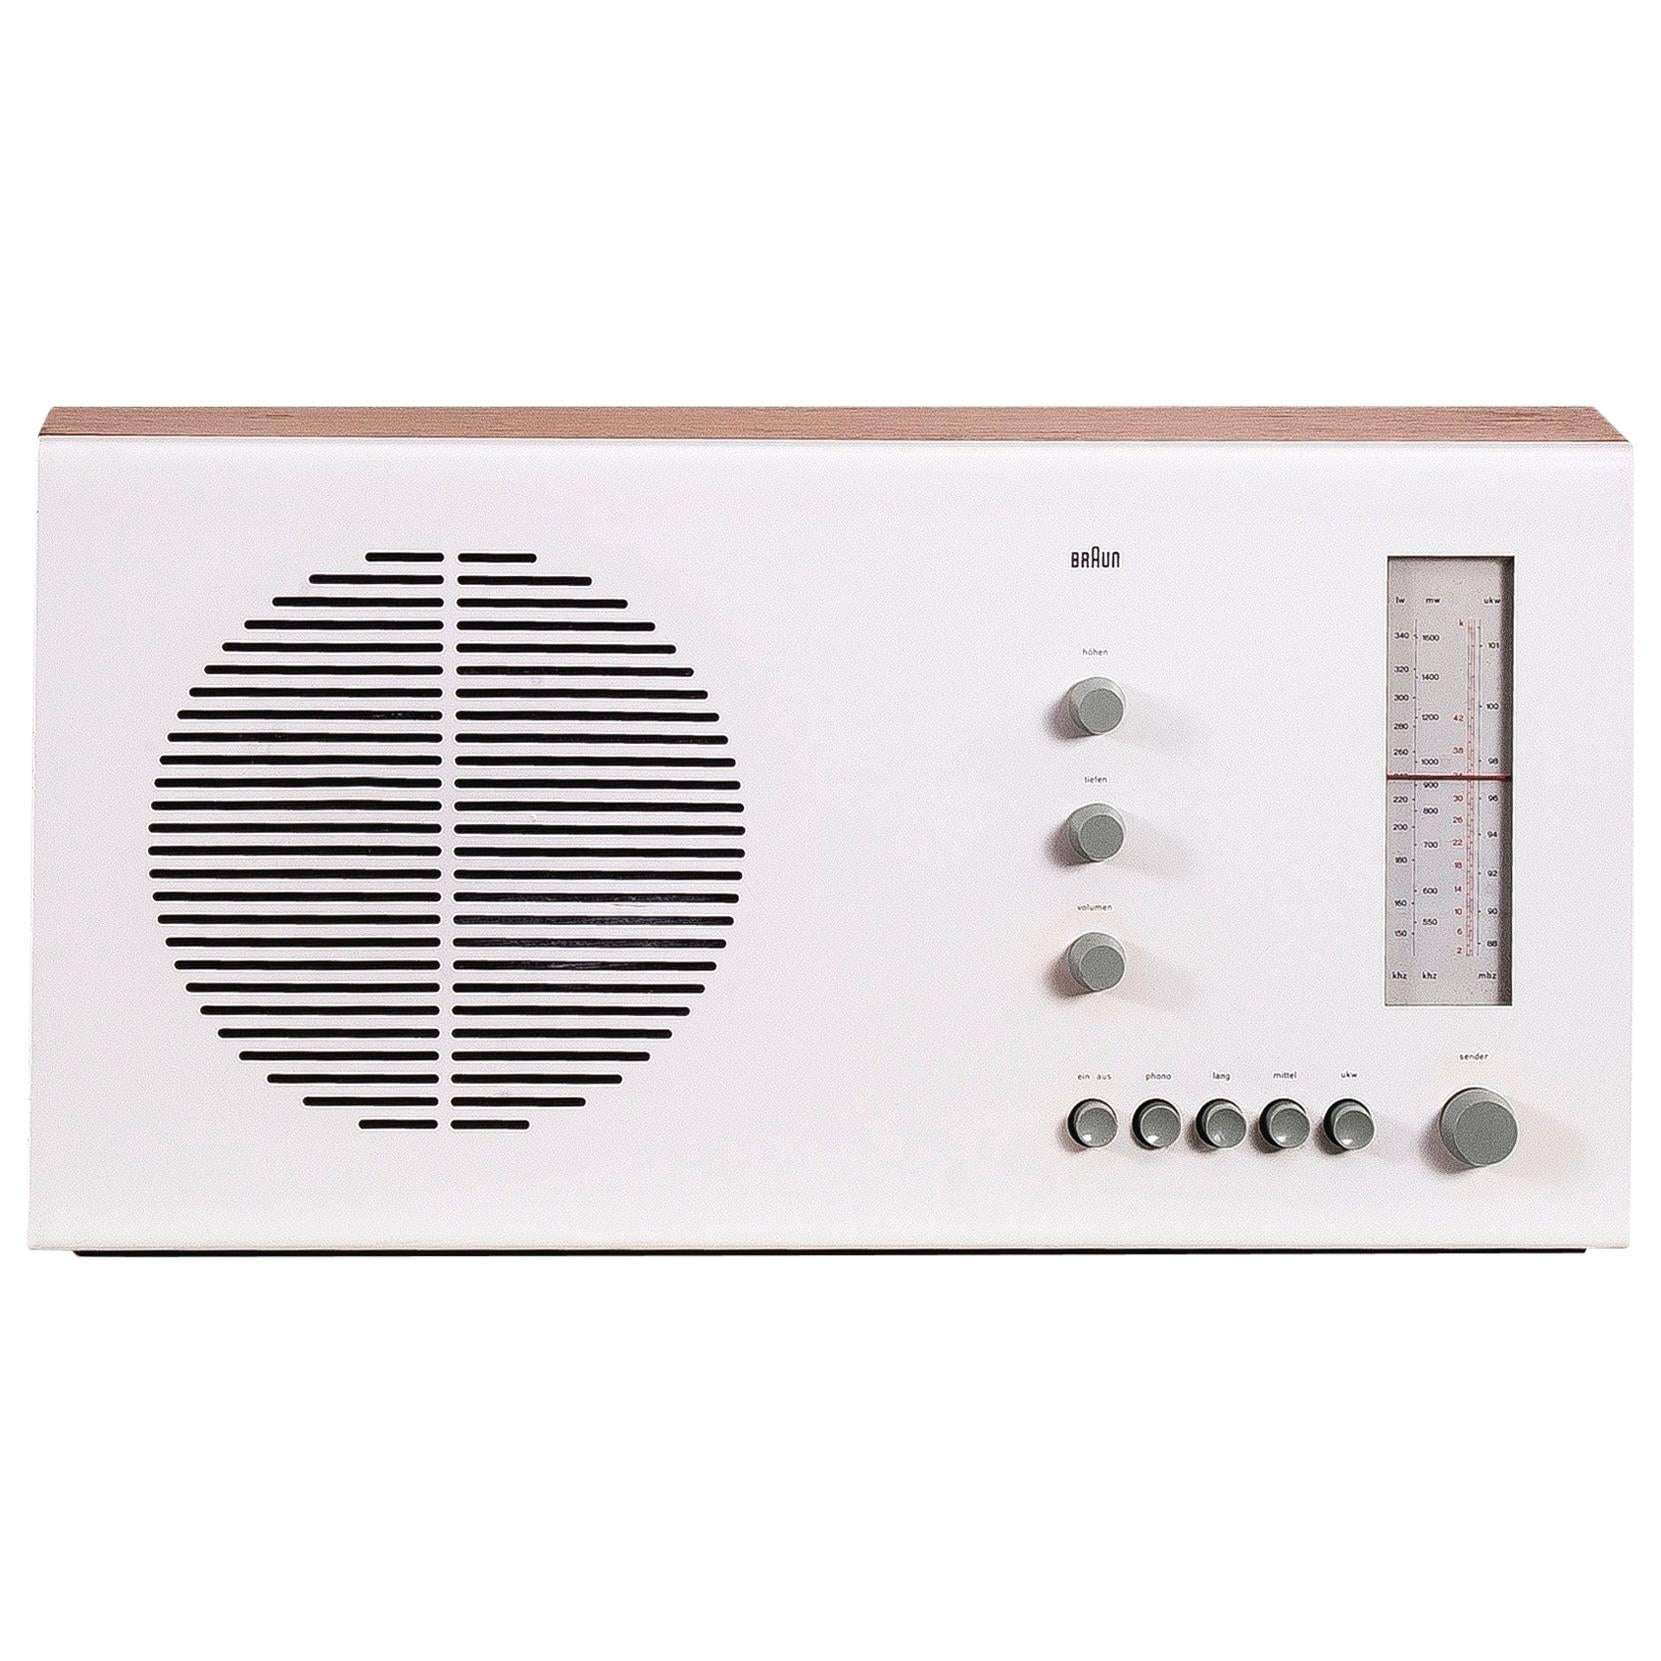 Dieter Rams No. 63 "RT20" in Lacquered Steel and Beech Veneer, 1961 For Sale